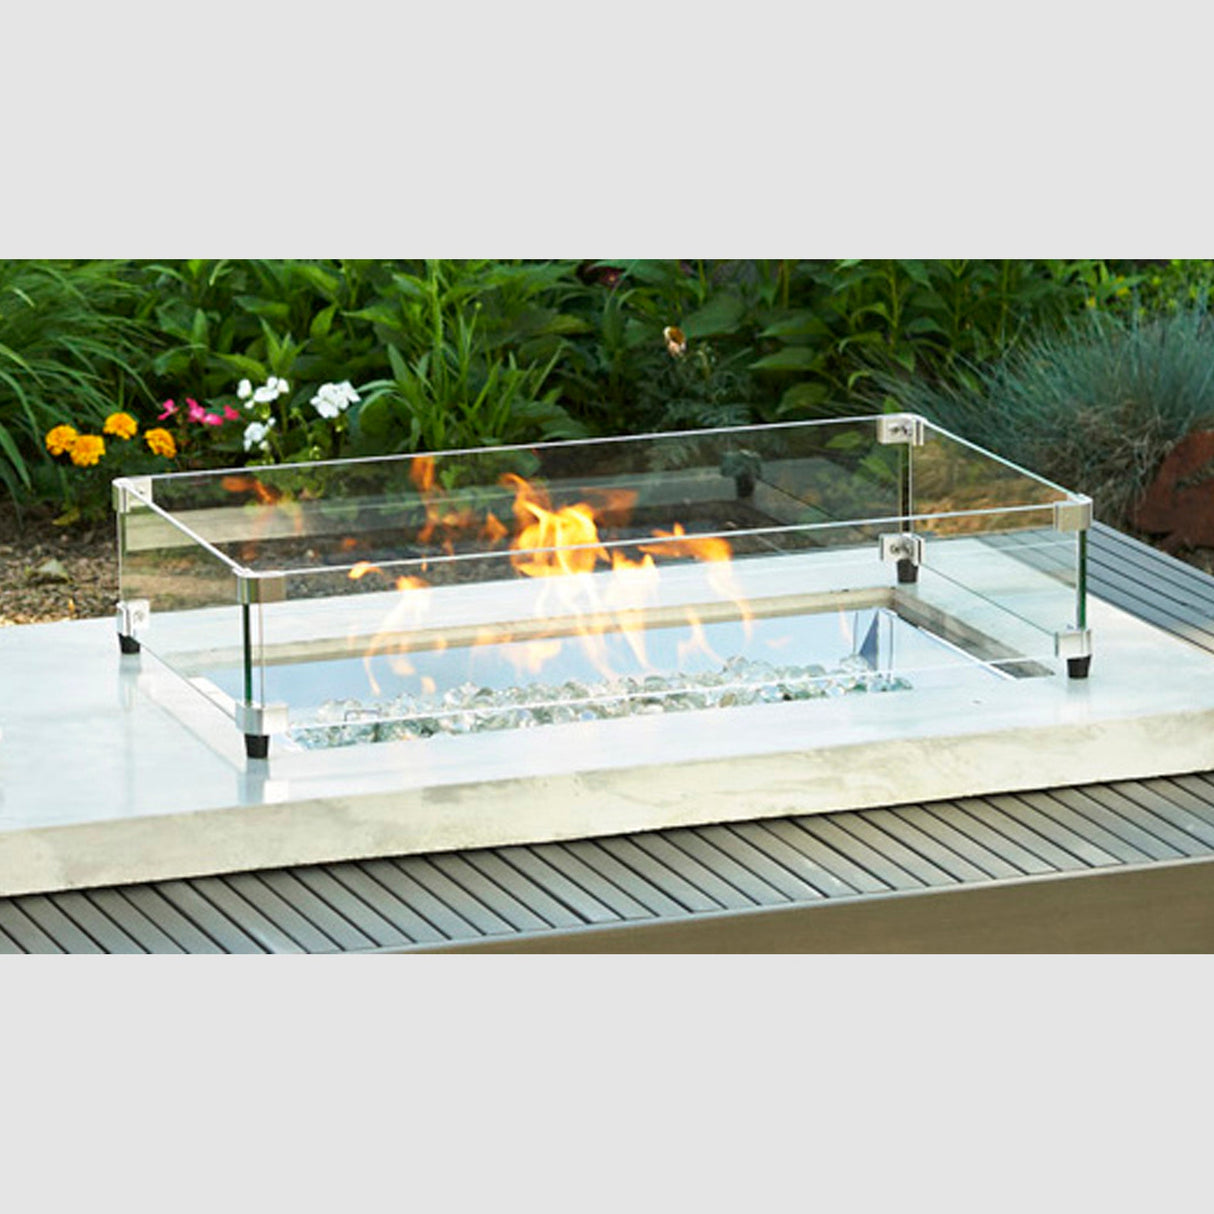 The Rectangular Glass Wind Guard in an outdoor setting with a large flame coming from the burner